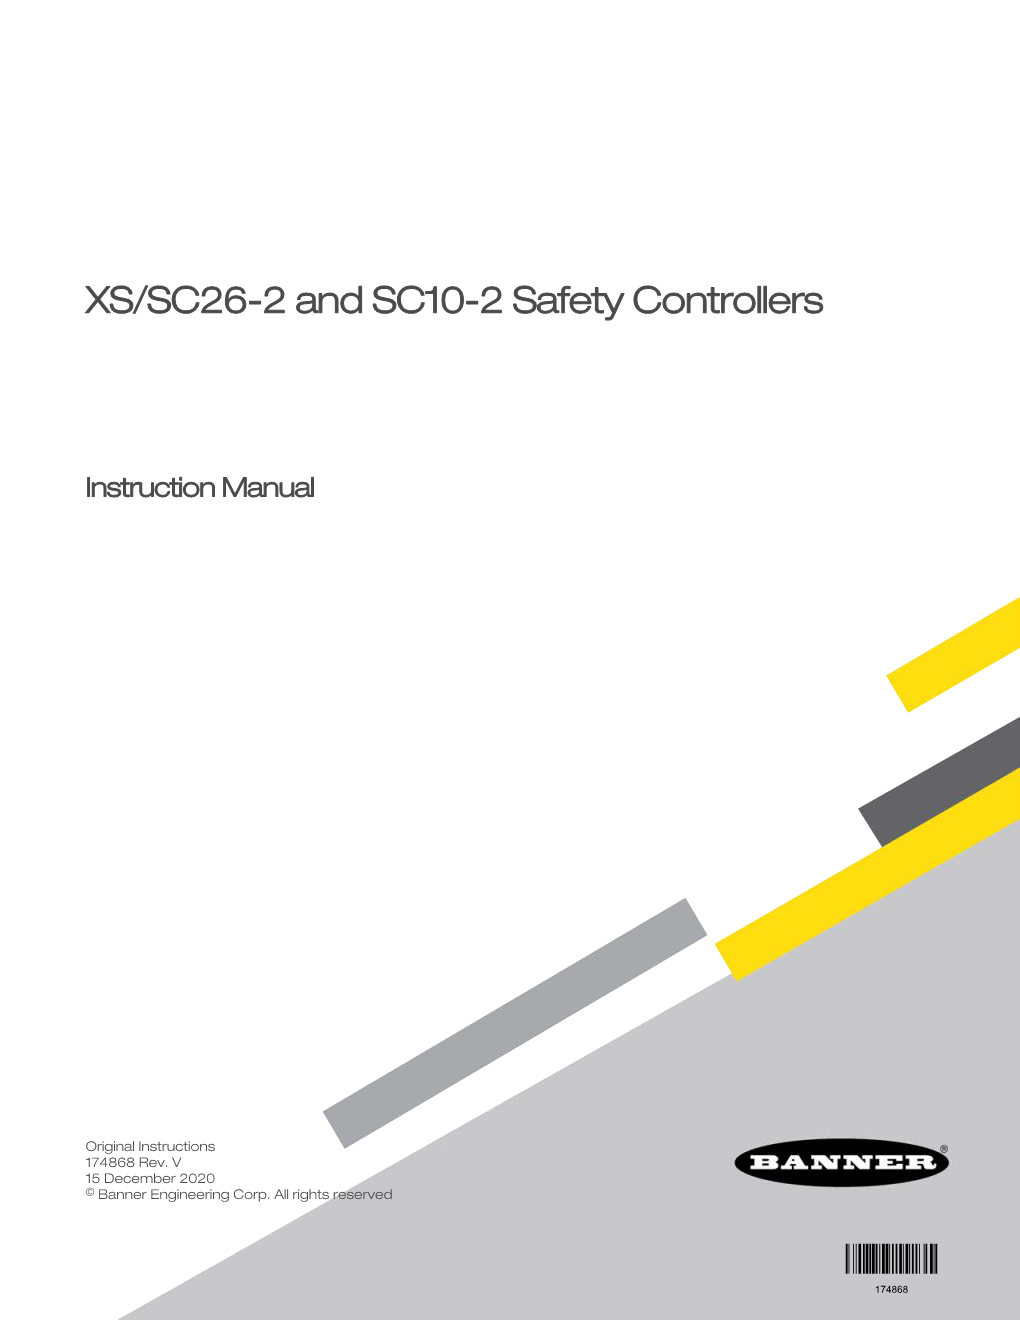 XS/SC26-2 and SC10-2 Safety Controllers Instruction Manual